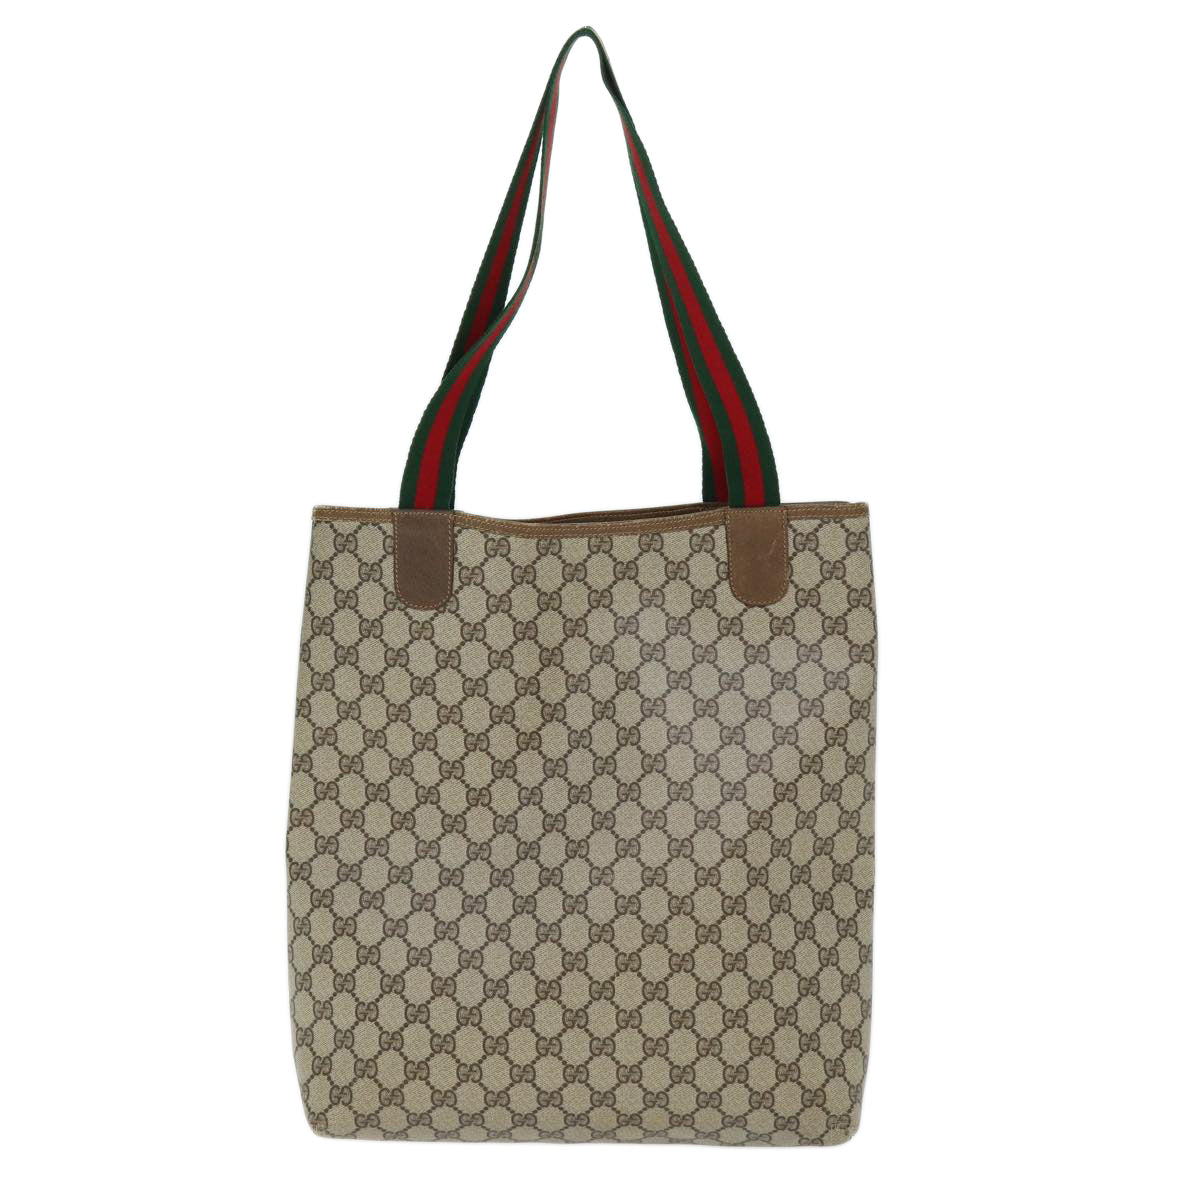 GUCCI GG Supreme Web Sherry Line Tote Bag Beige Red Green 39 02 003 Auth 73610 - 0